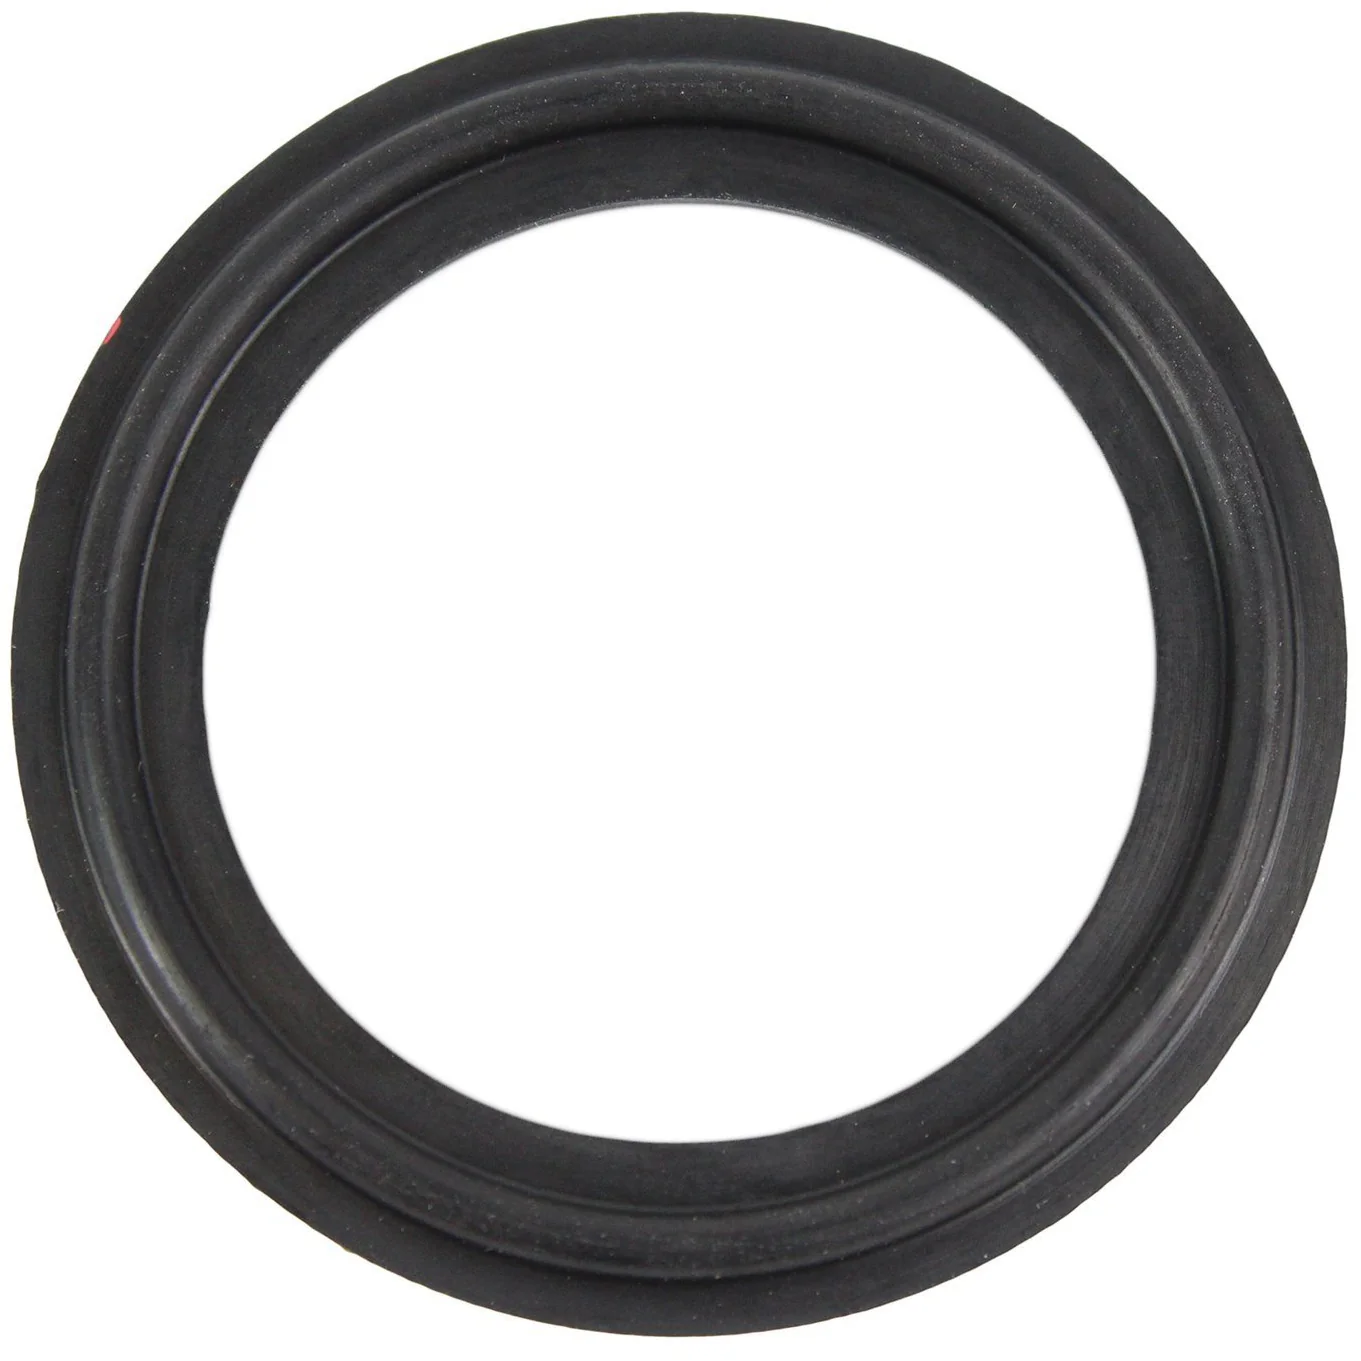 BUNA-N Tri-Clamp Gaskets (Made in USA, FDA Compliant / Meets 3A Standards) Questions & Answers